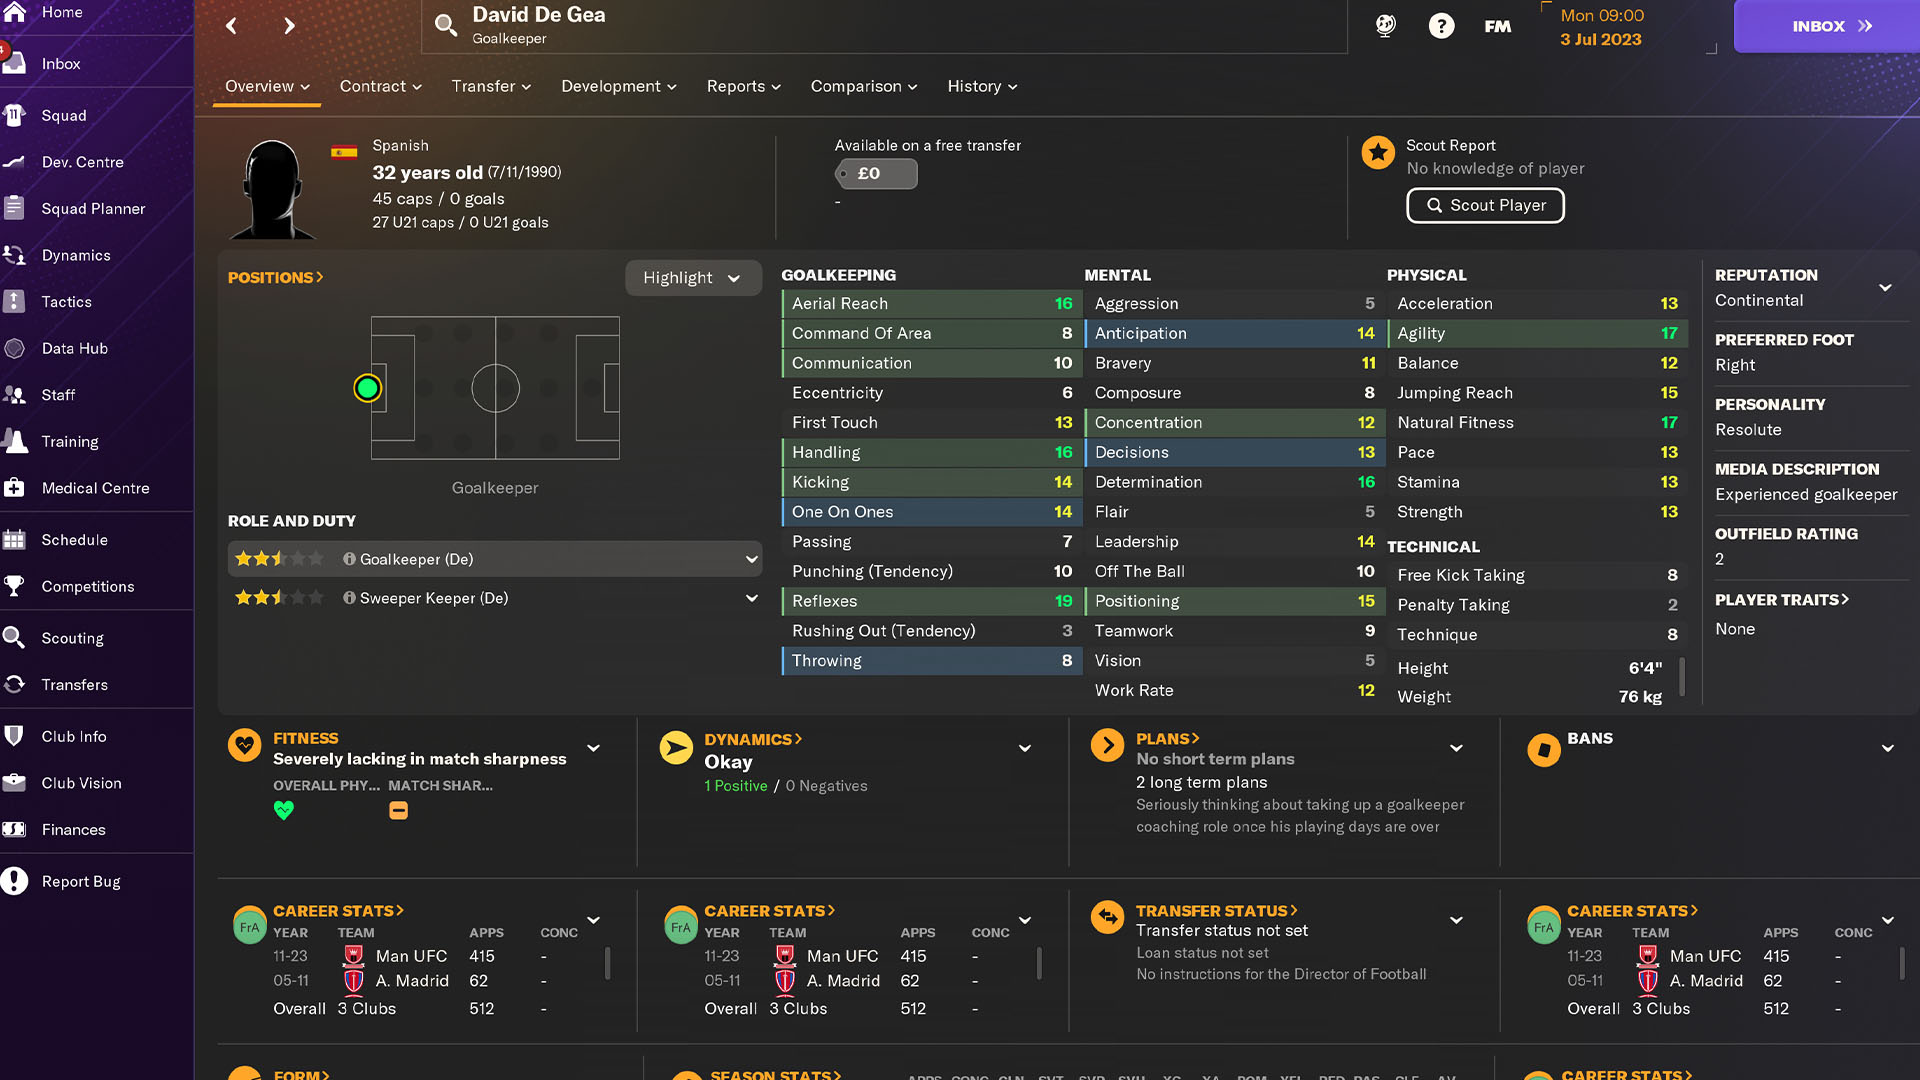 Best FM24 Free Agents - Top Players to Sign on the Cheap